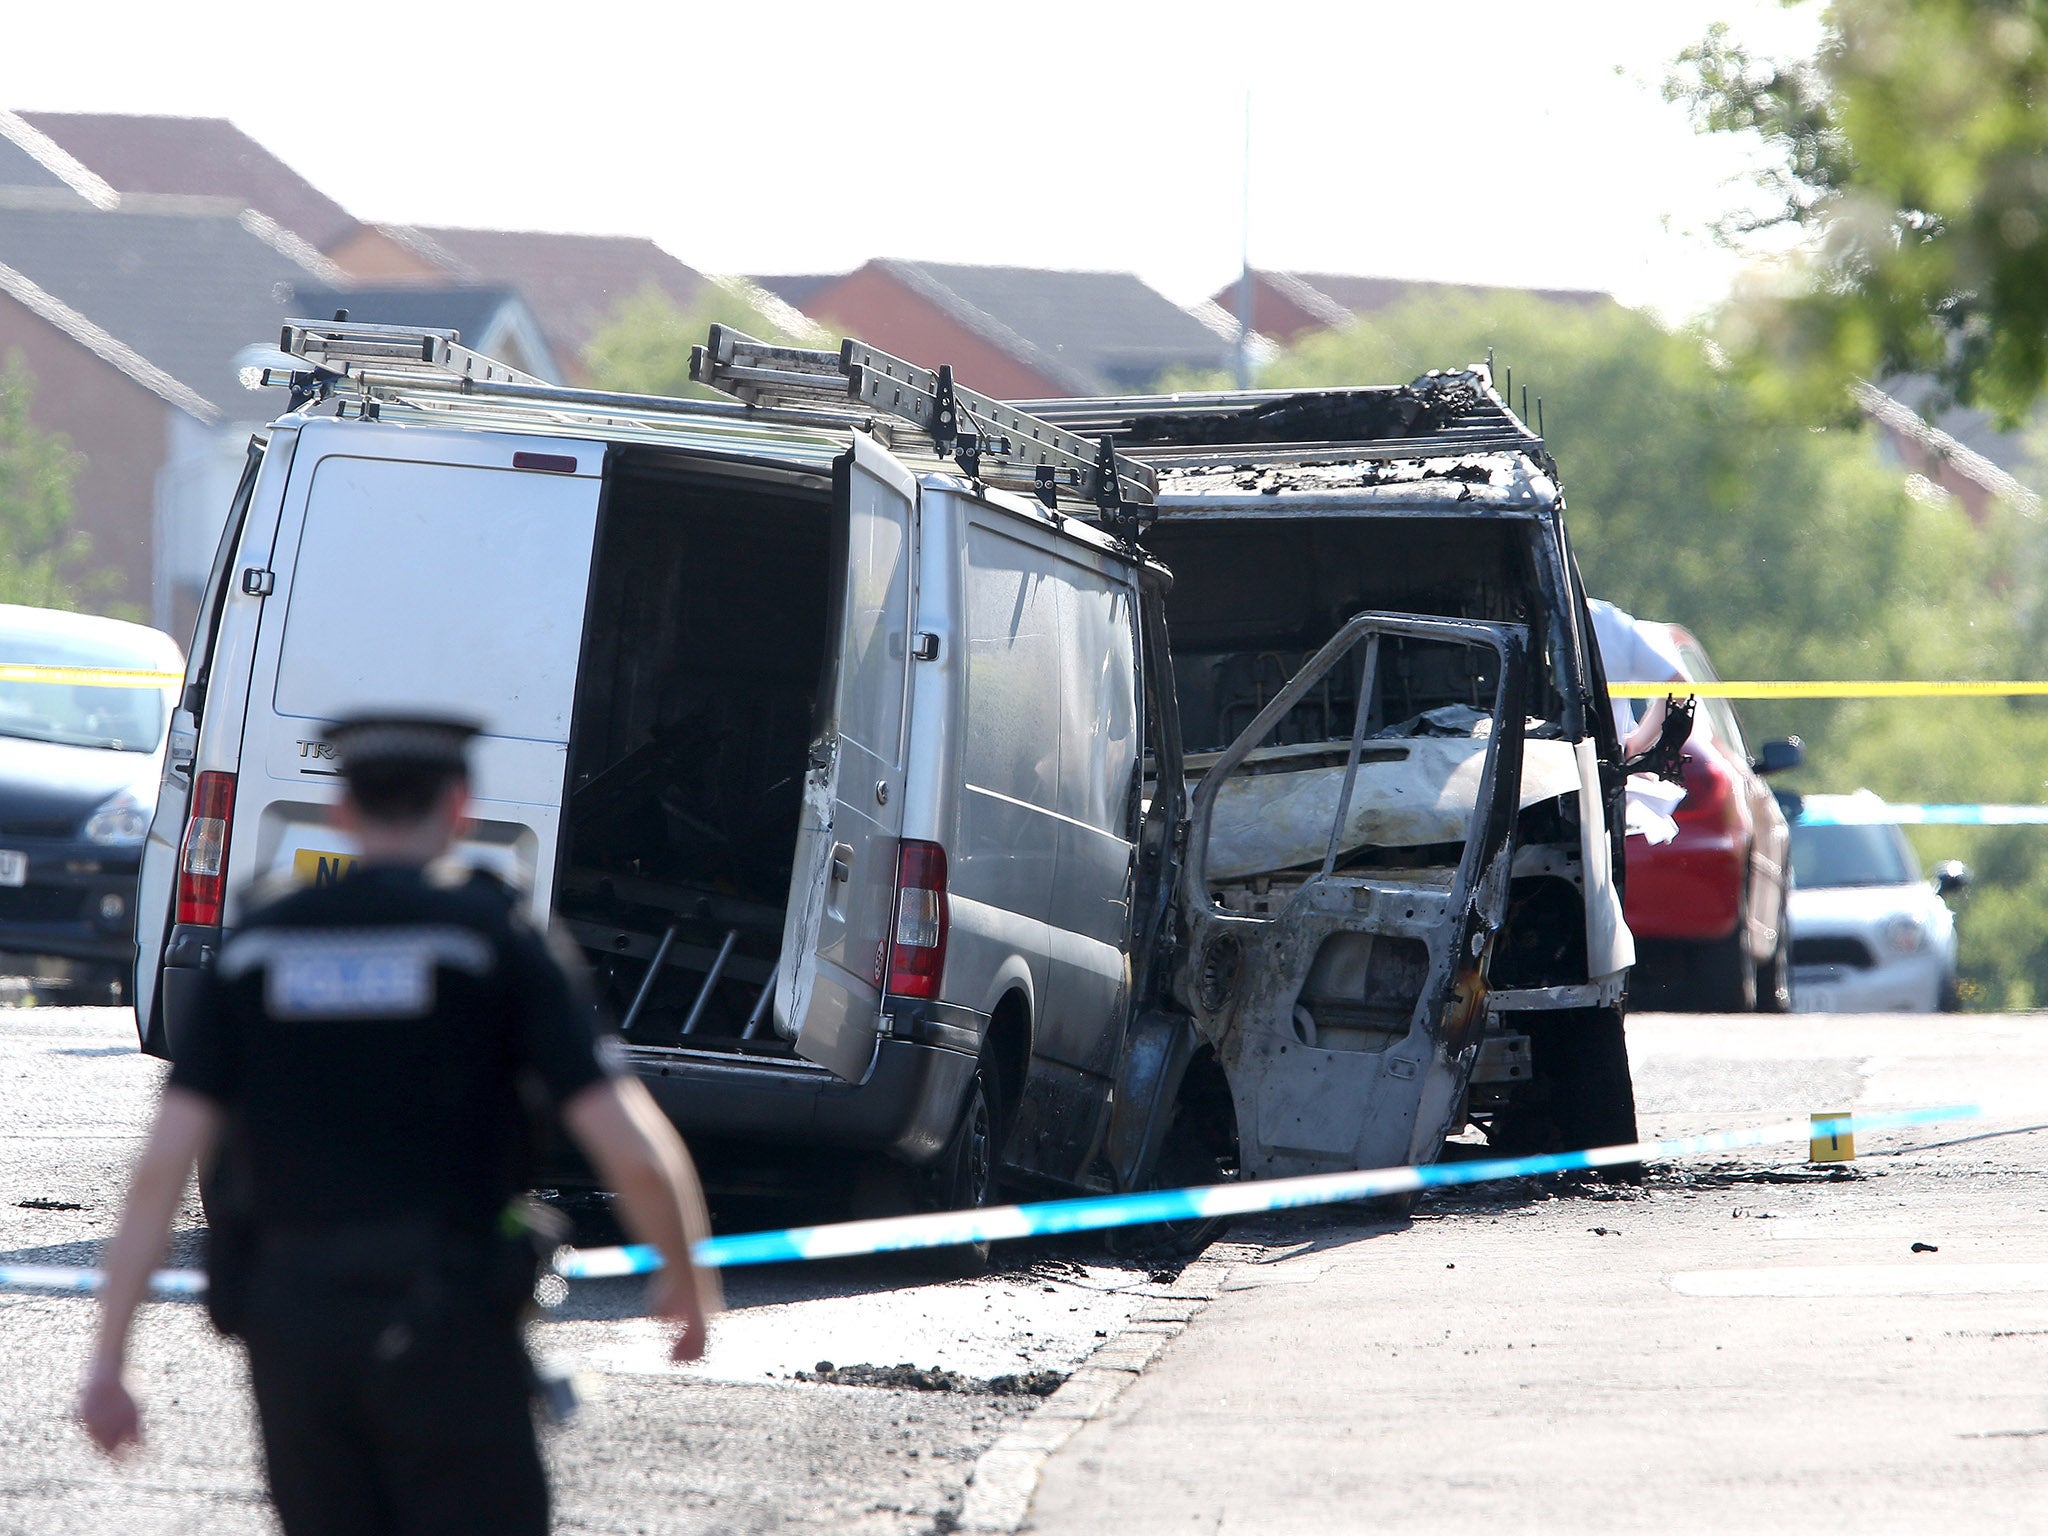 Police were called to the incident in Glasgow where several people were rumoured to have been shot and vehicles were set on fire